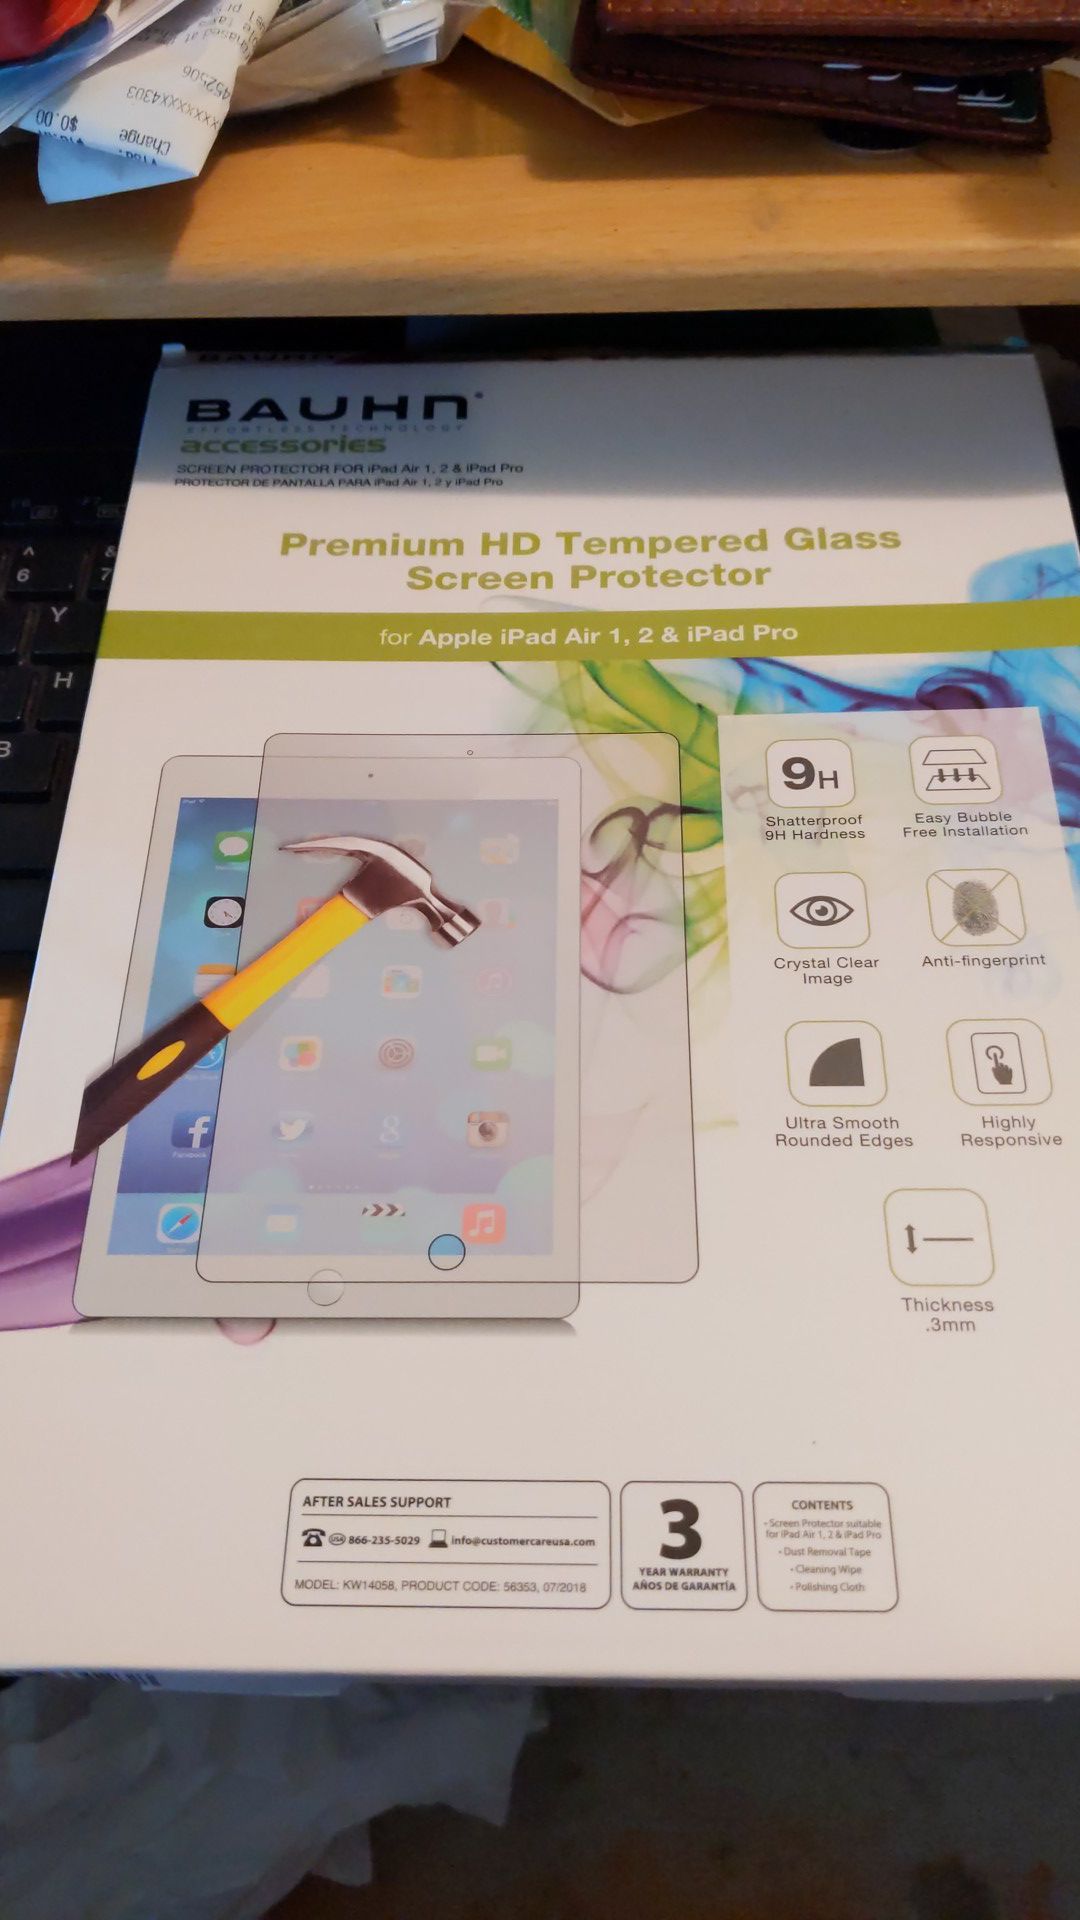 Bauhn HD Tempered glass screen protector